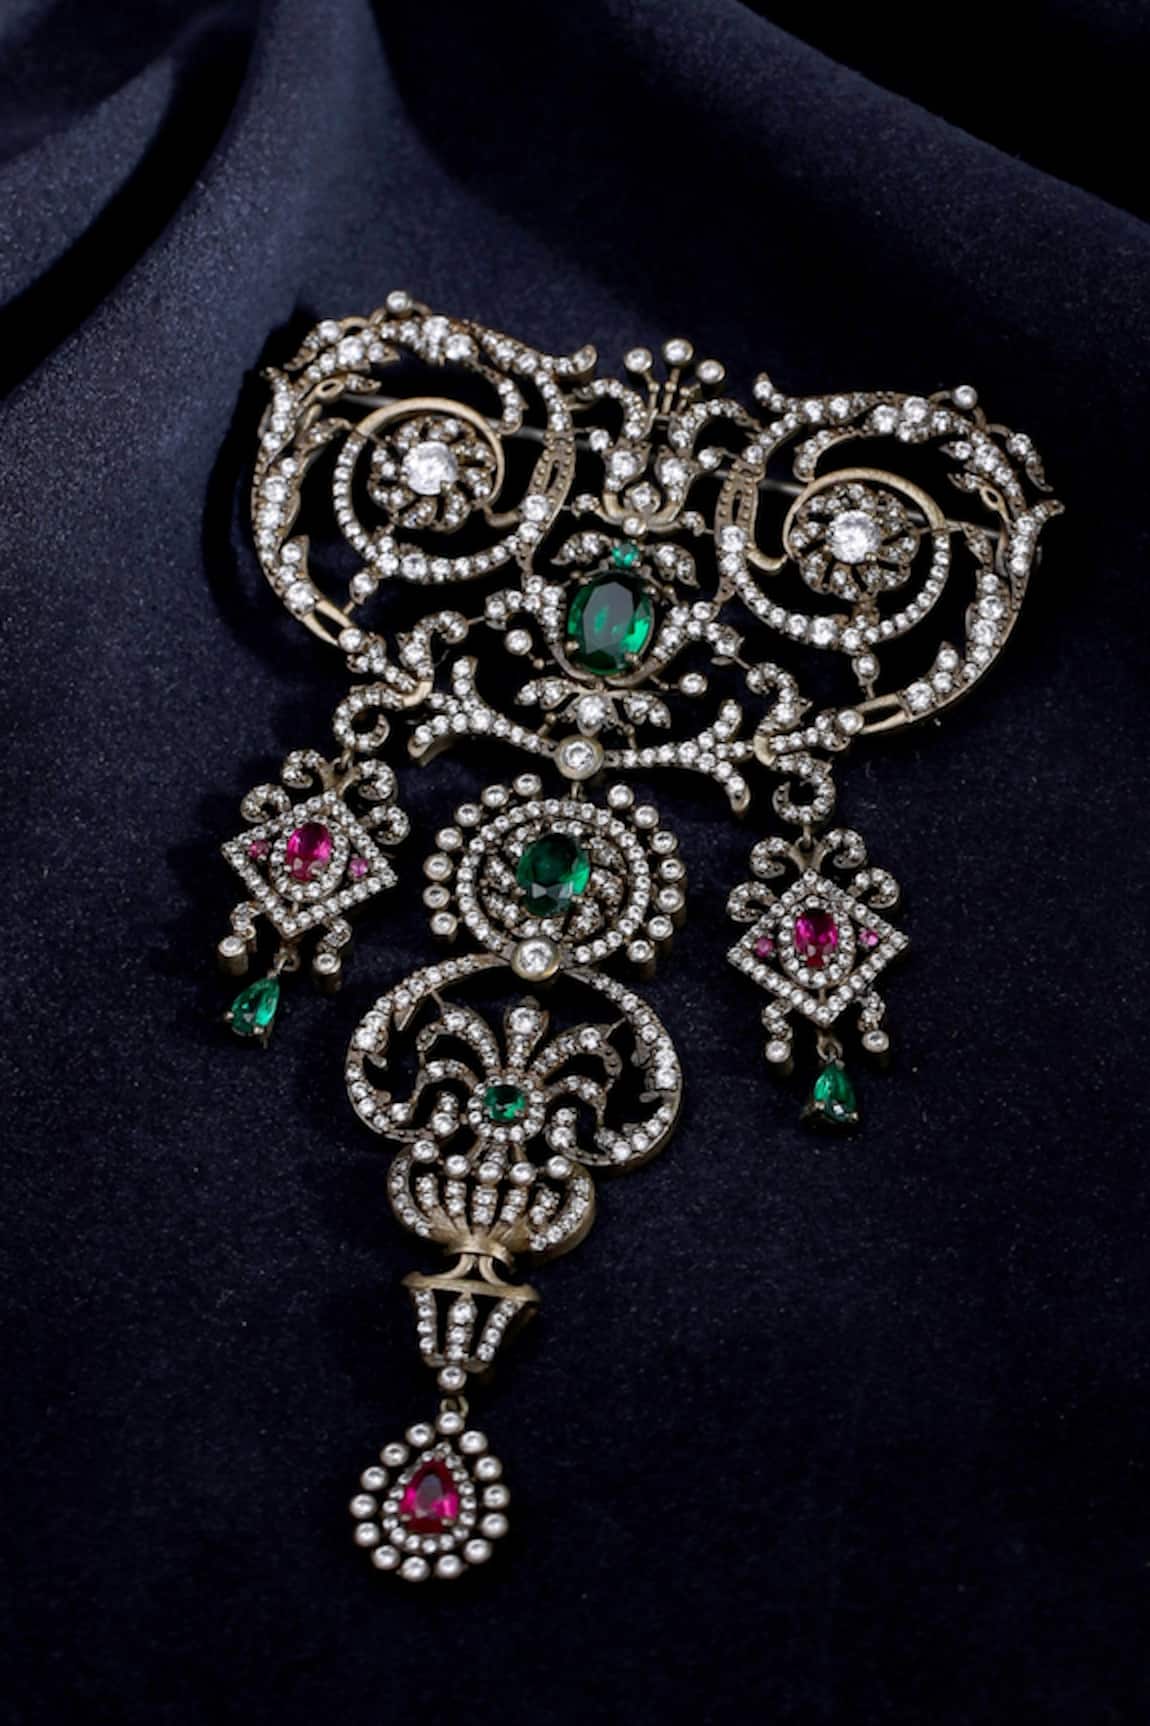 Cosa Nostraa Stone Embellished Brooch